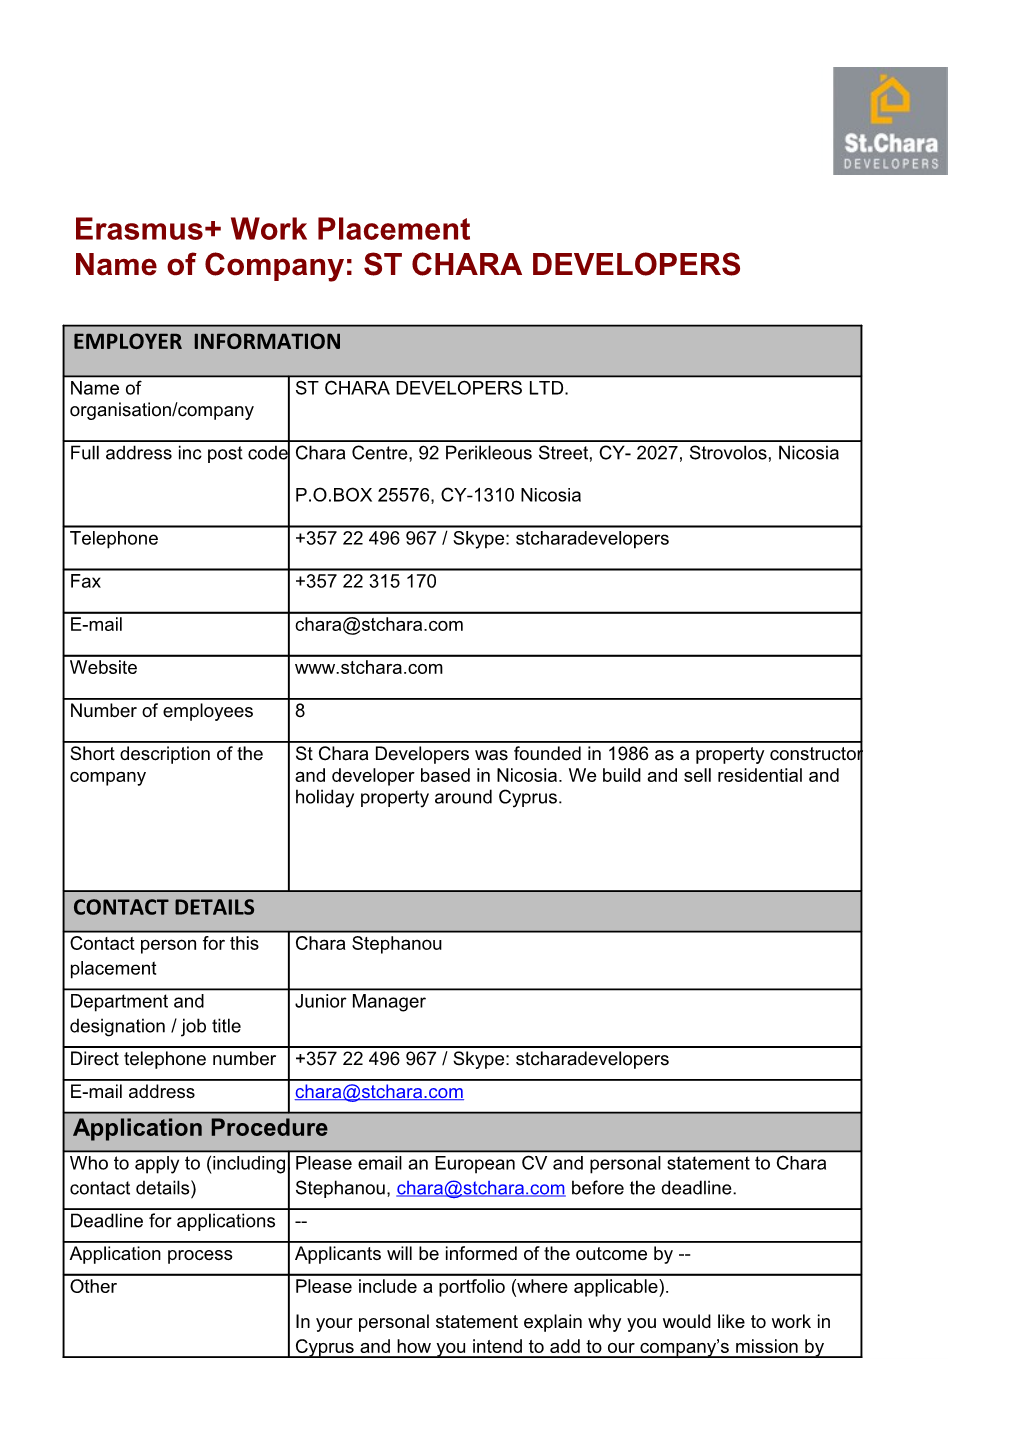 Name of Company: ST CHARA DEVELOPERS